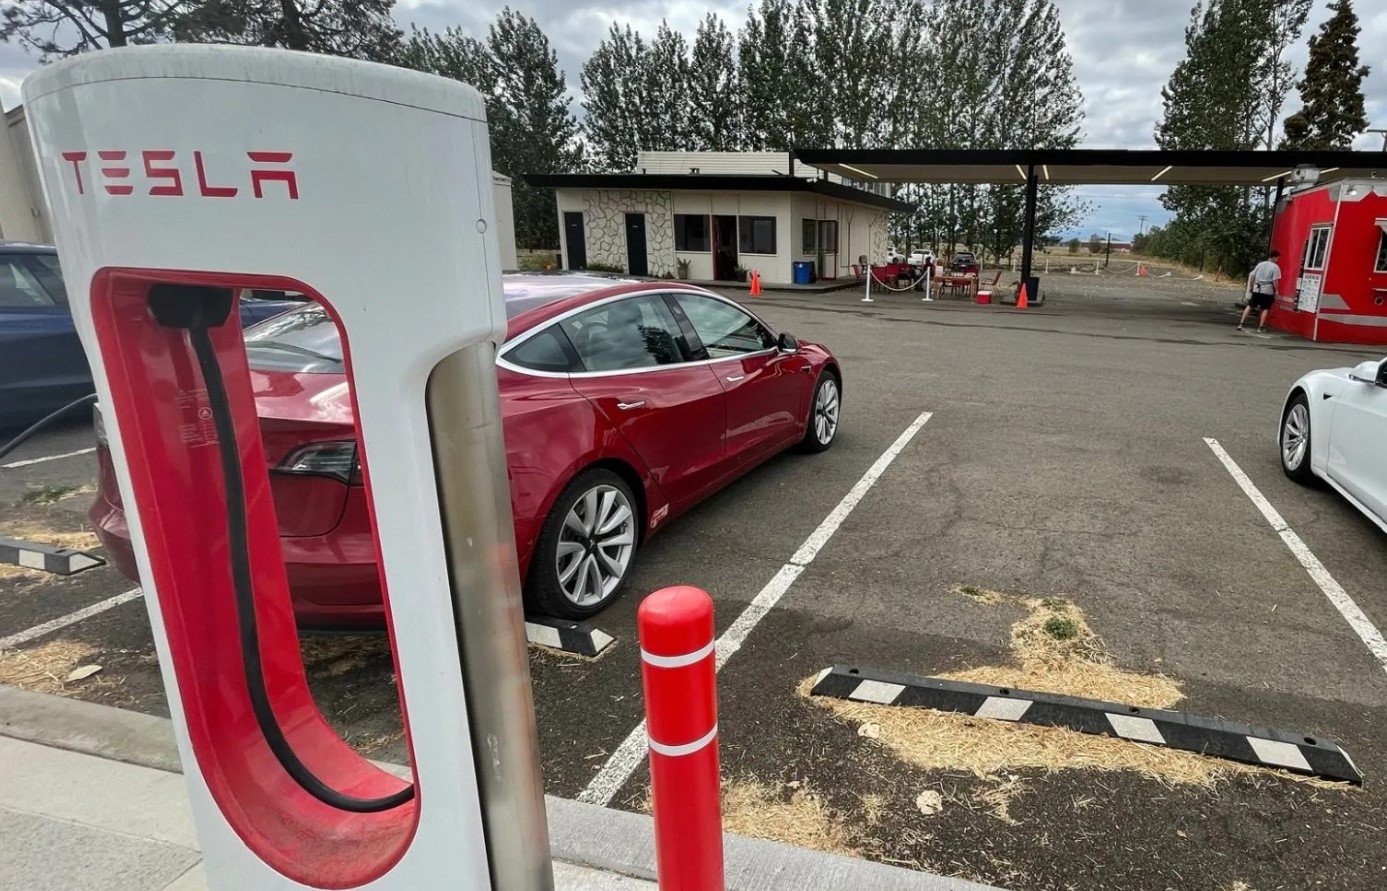 Tesla driver reveals how long we need to stop to charge electric car batteries for 1,000-mile trip 2